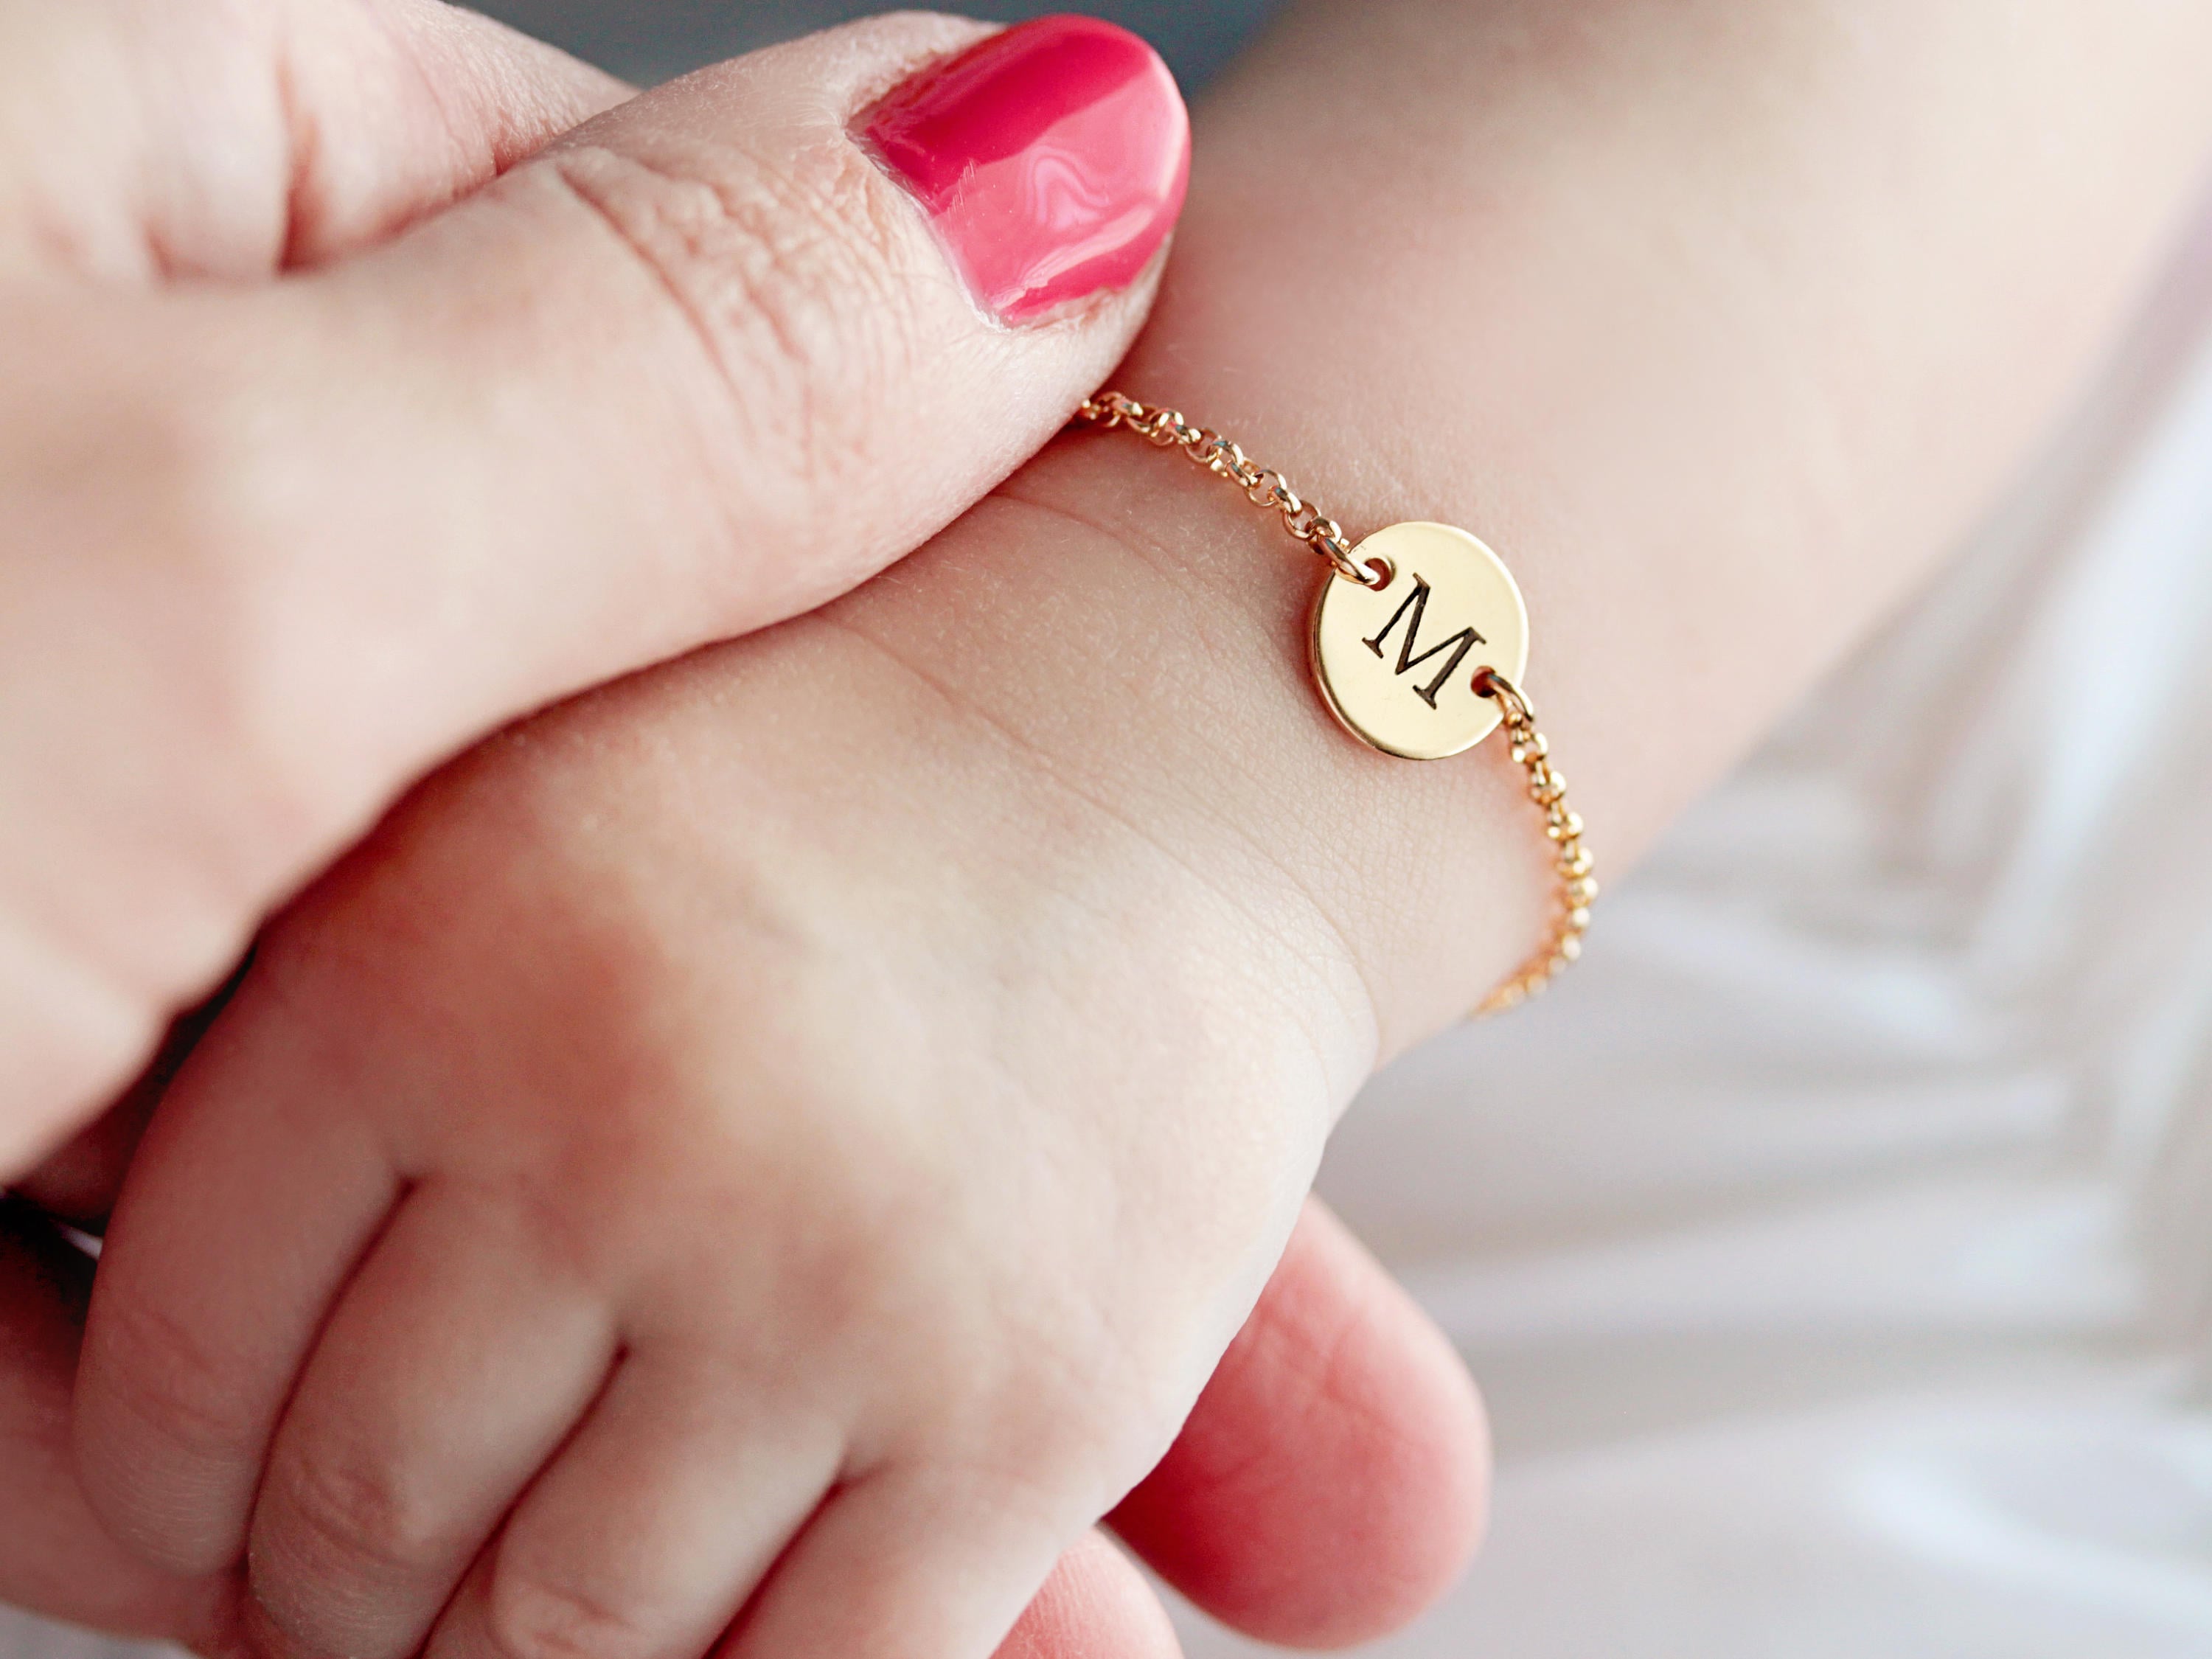 14K Gold Filled Baby Bracelet With Engraving 6' adjustable for new born baby 